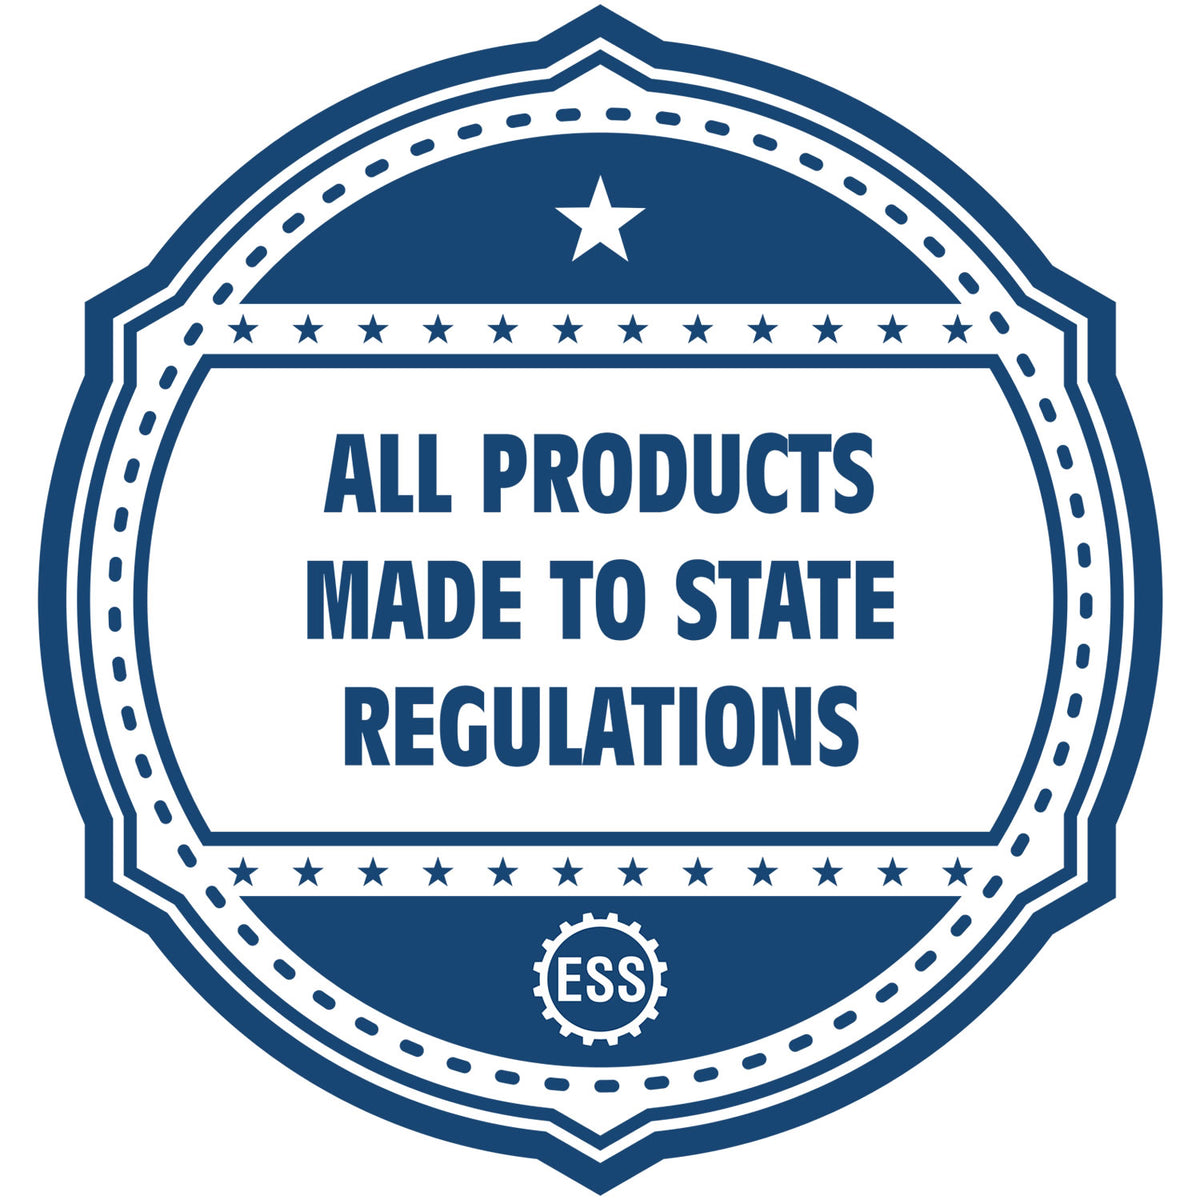 An icon or badge element for the Tennessee Engineer Desk Seal showing that this product is made in compliance with state regulations.